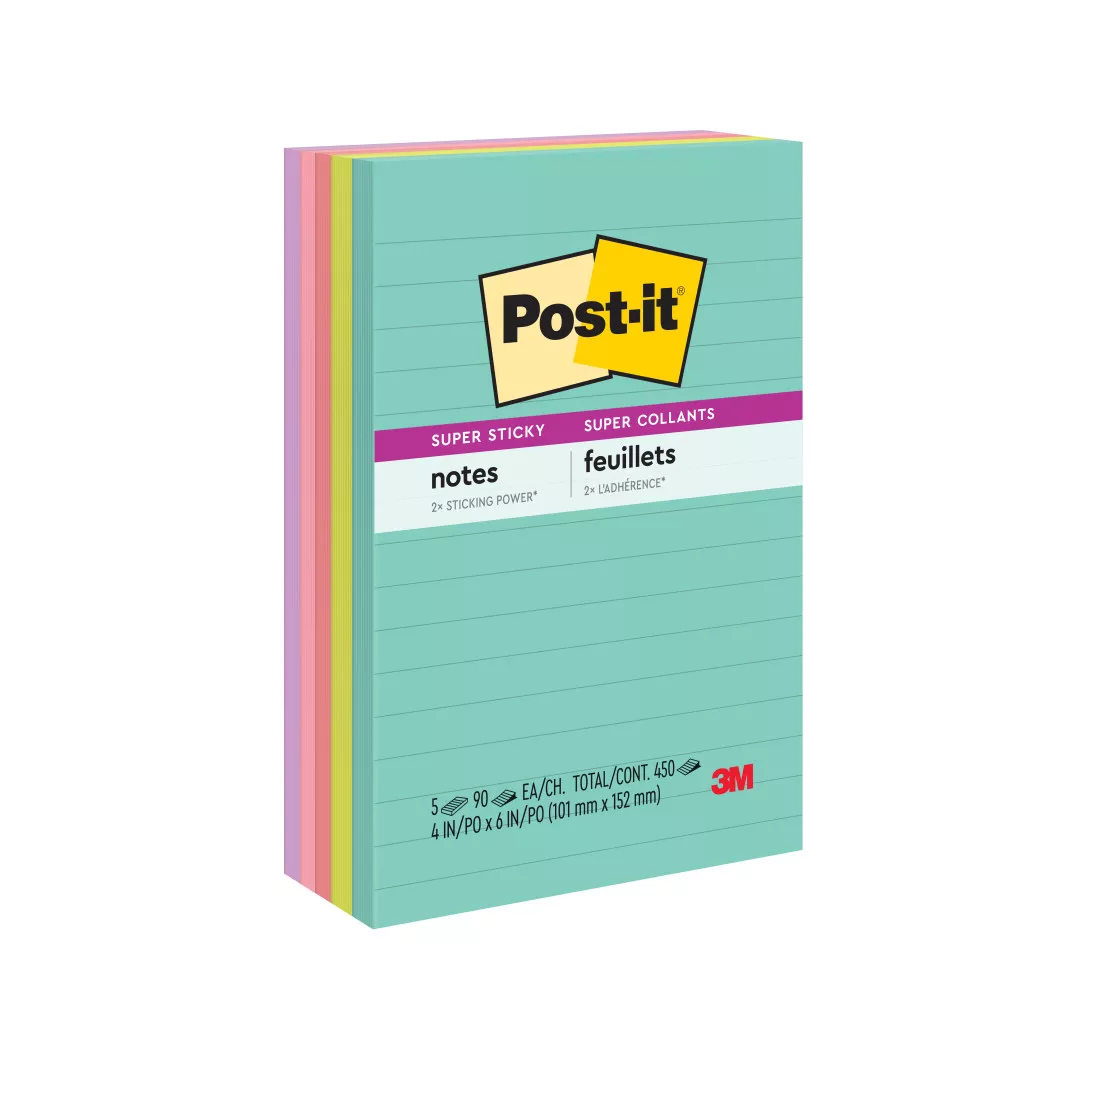 Post-it® Super Sticky Notes 660-5SSMIA, 4 in x 6 in (101 mm x 152 mm),
Miami Collection, 8 Pads/Pack, 90 Sheets/Pad, Lined